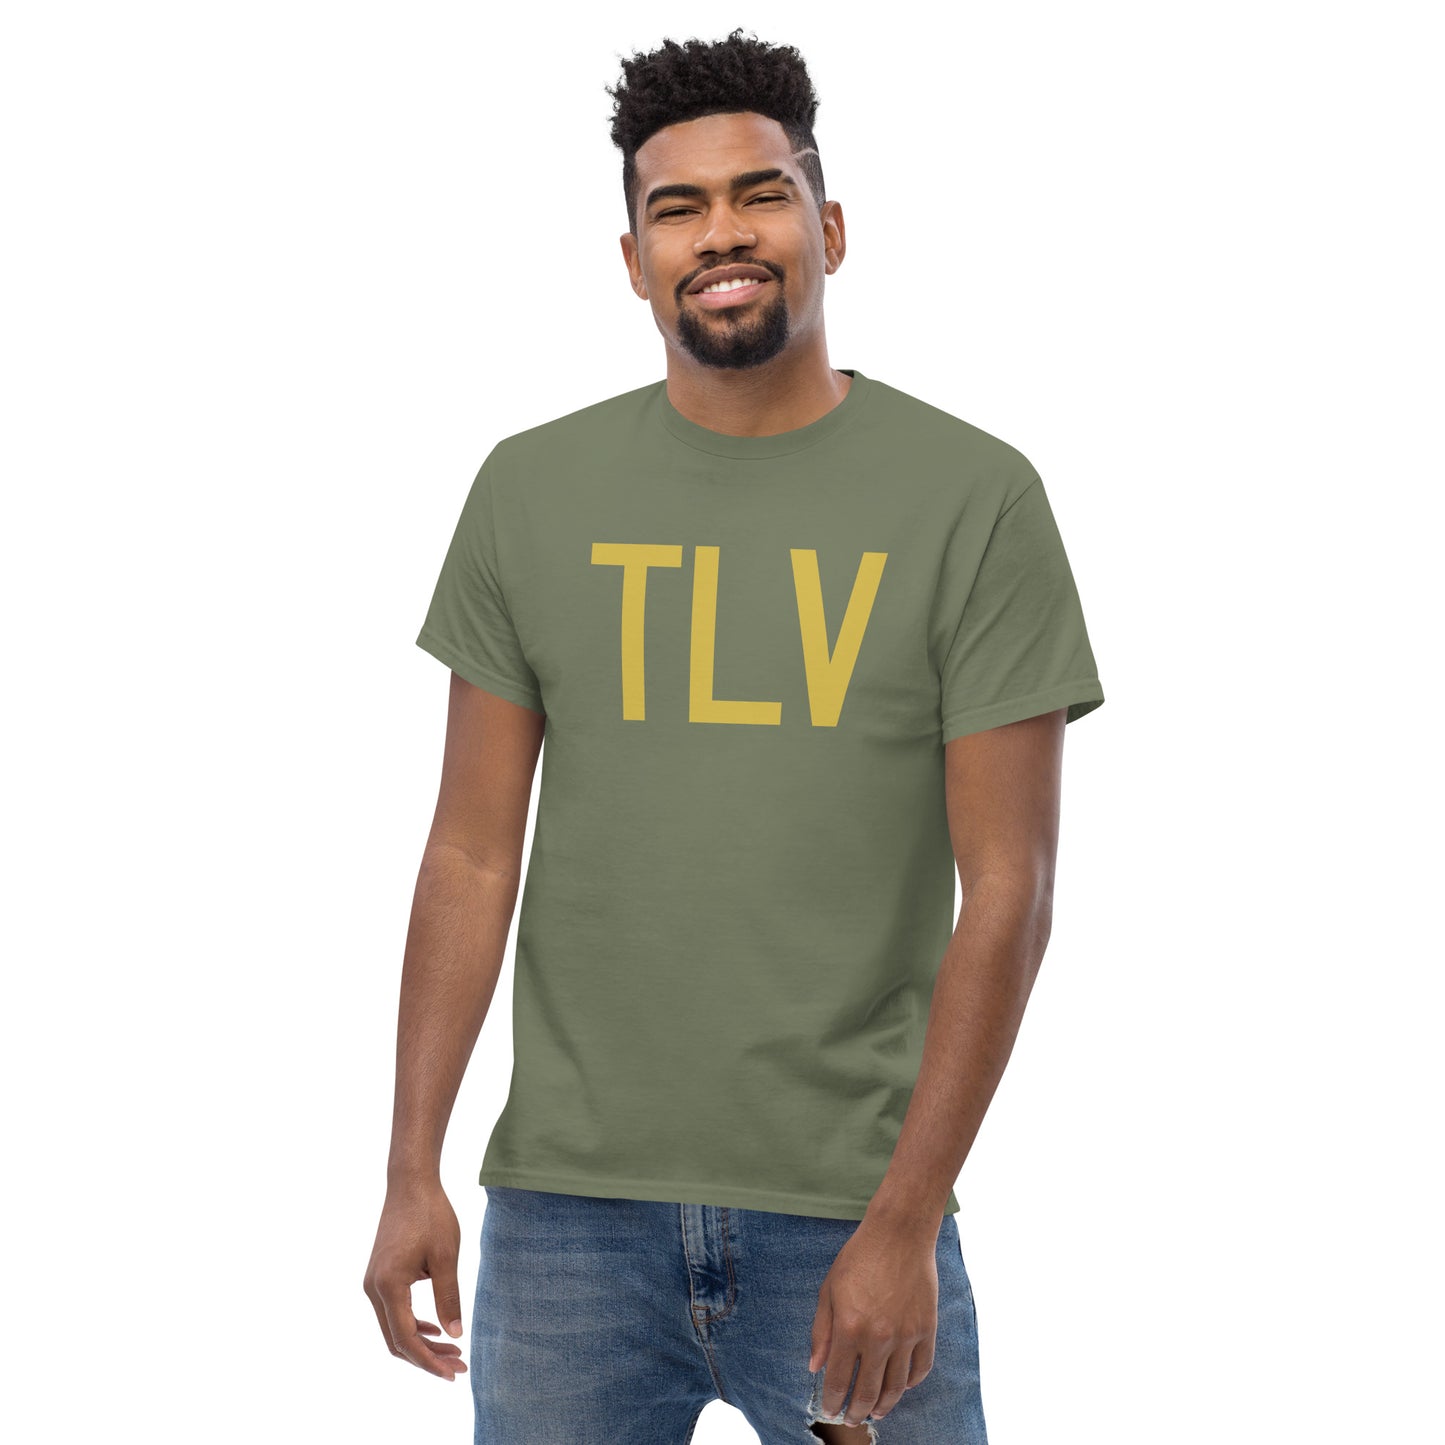 Aviation Enthusiast Men's Tee - Old Gold Graphic • TLV Tel Aviv • YHM Designs - Image 06